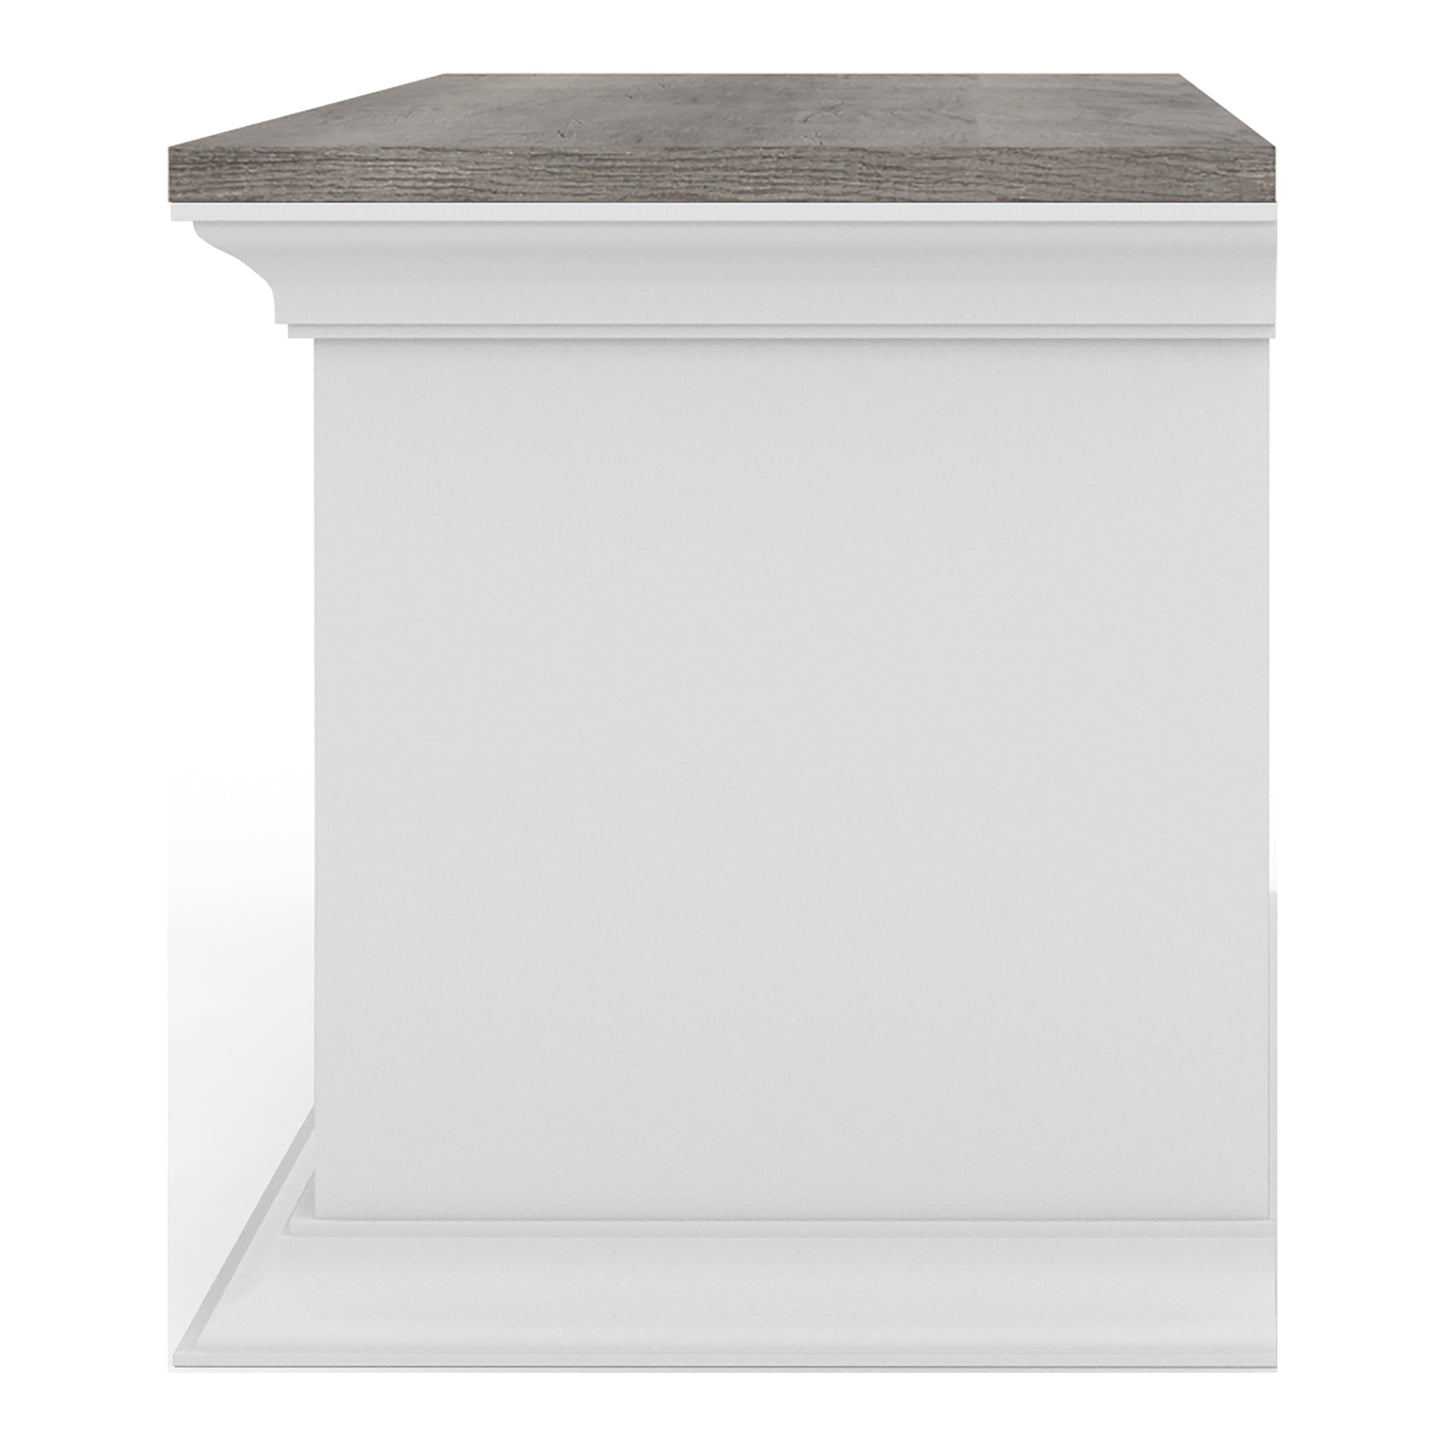 Front-facing side view of a transitional vintage gray oak and white floating TV stand with three shelves on a white background